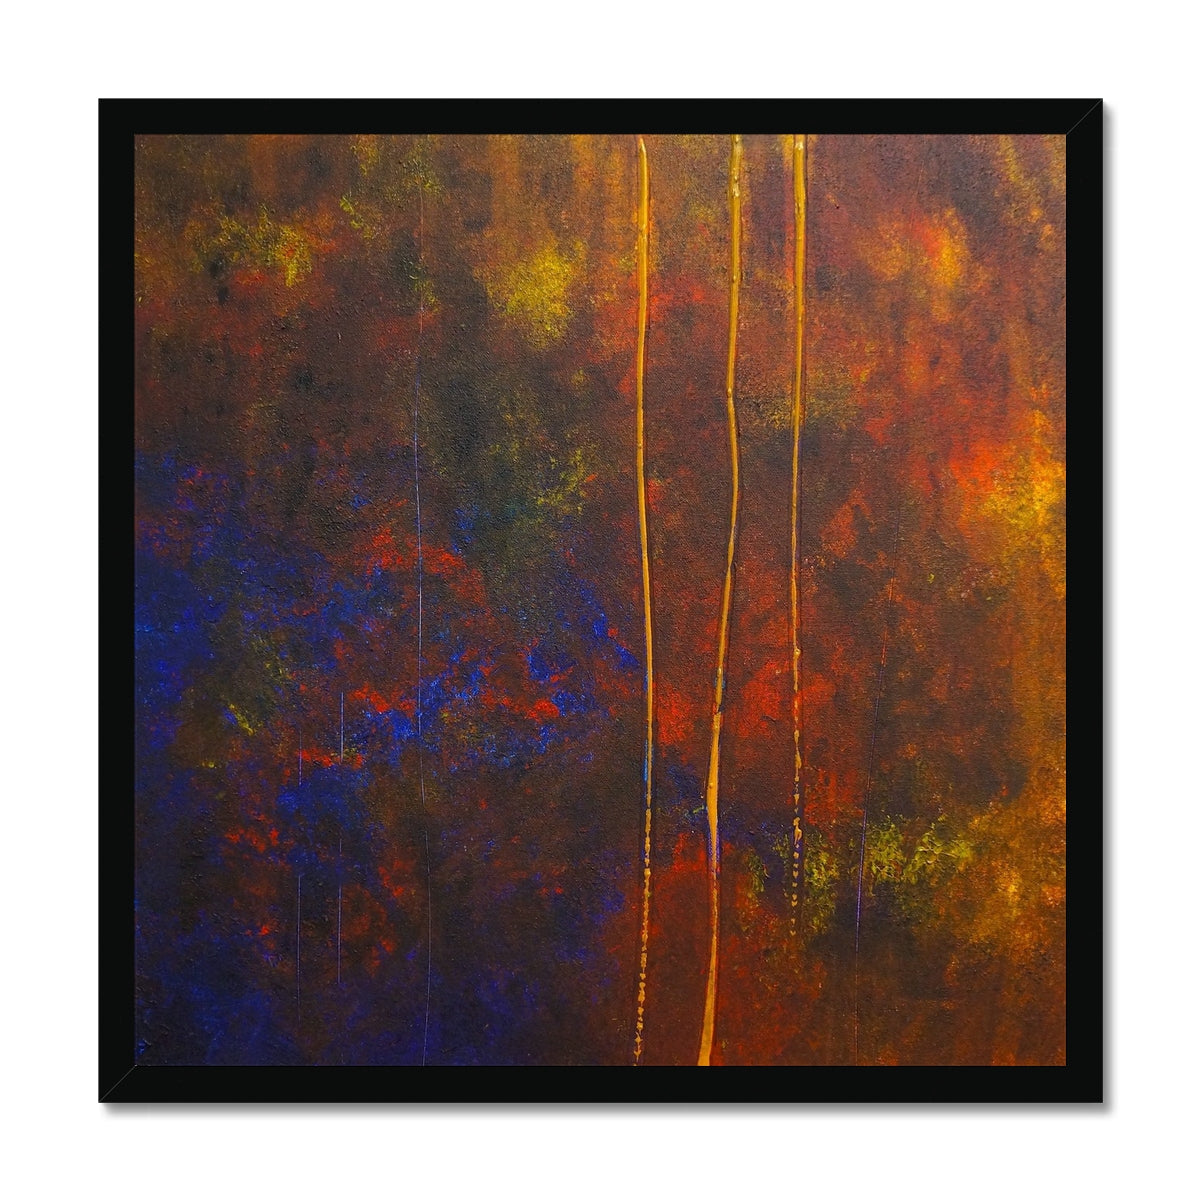 The Autumn Wood Abstract Painting | Framed Prints From Scotland-Framed Prints-Abstract & Impressionistic Art Gallery-20"x20"-Black Frame-Paintings, Prints, Homeware, Art Gifts From Scotland By Scottish Artist Kevin Hunter